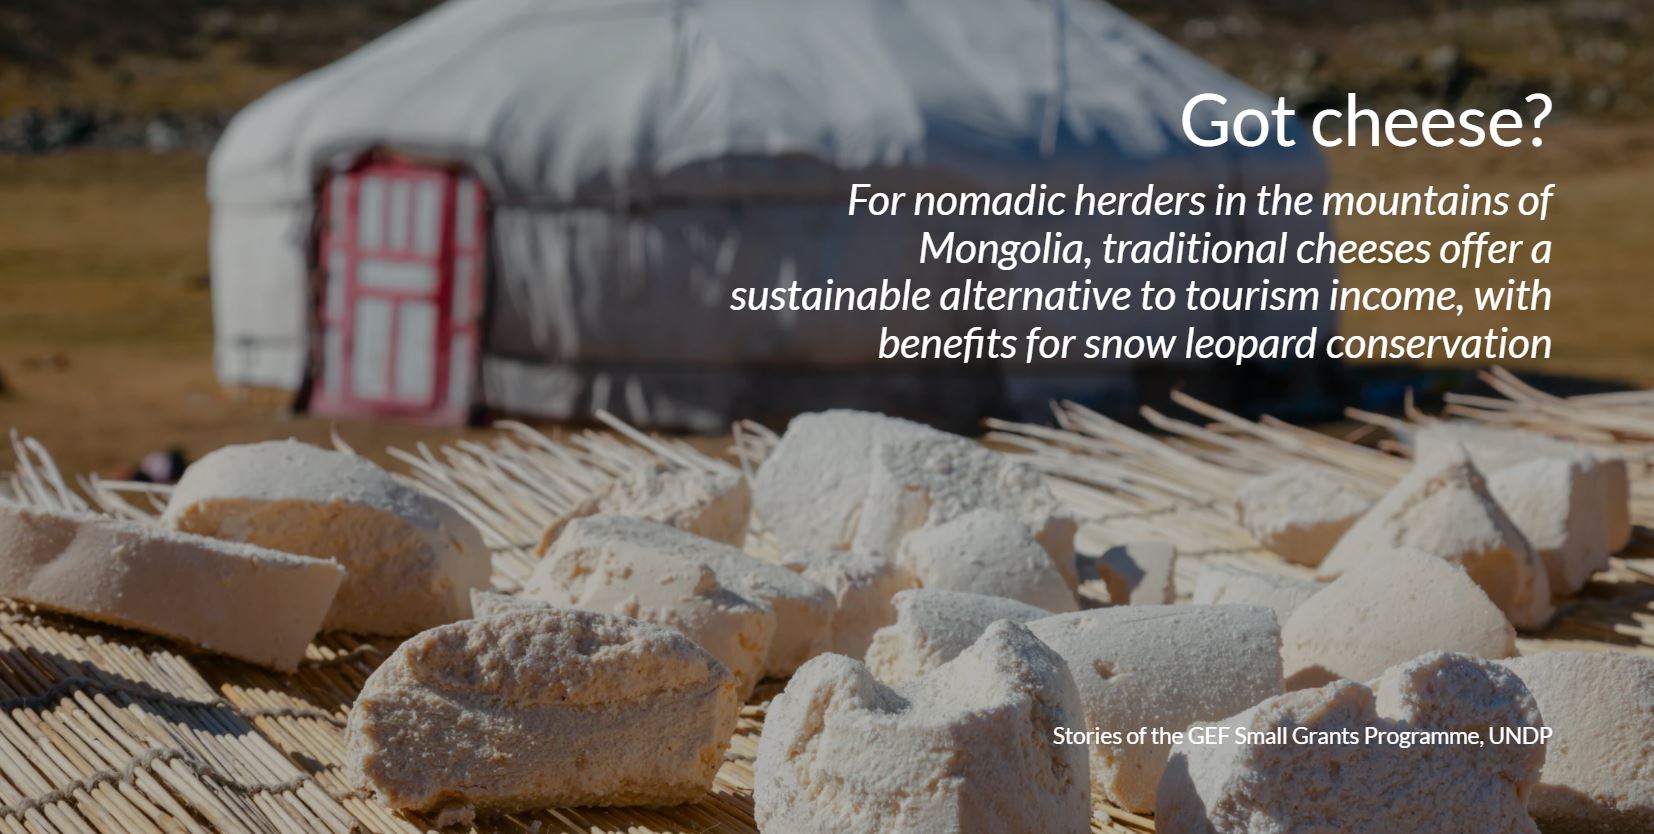 Got cheese? For nomadic herders in the mountains of Mongolia, traditional cheeses offer a sustainable alternative to tourism income, with benefits for snow leopard conservation